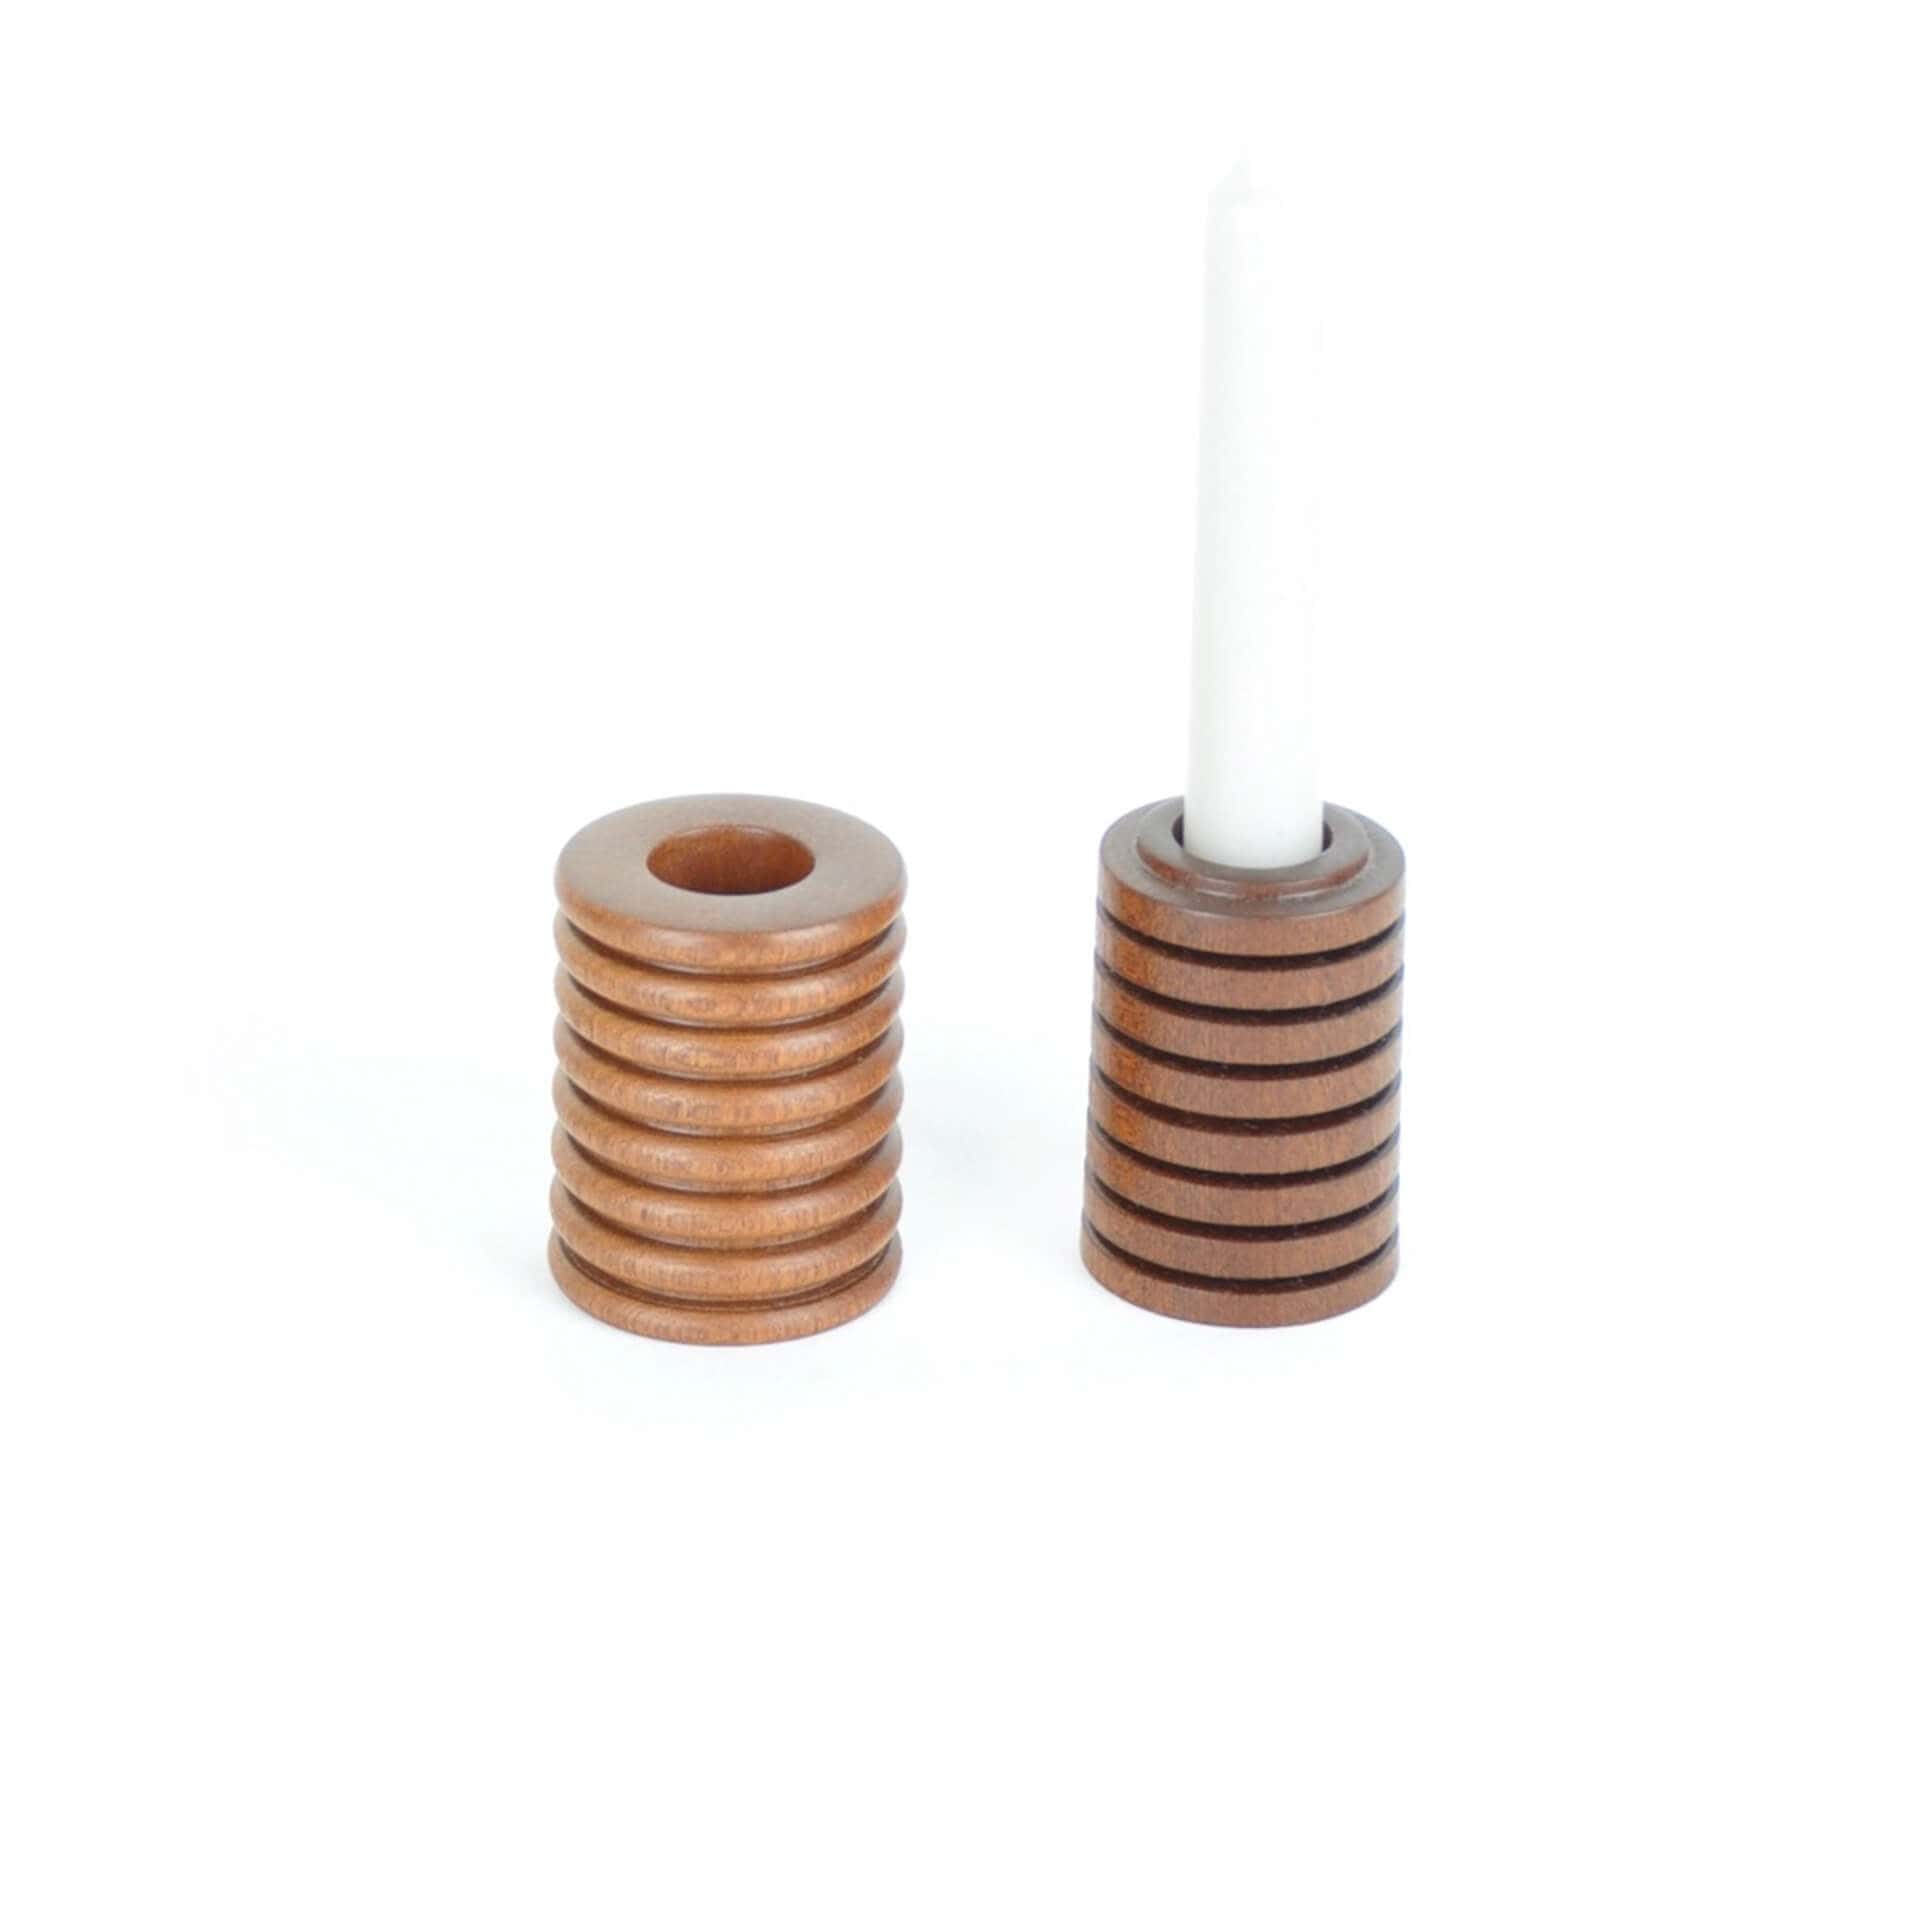 Something From The Turnery Candle Holder Wooden Candle Holders - Sapele